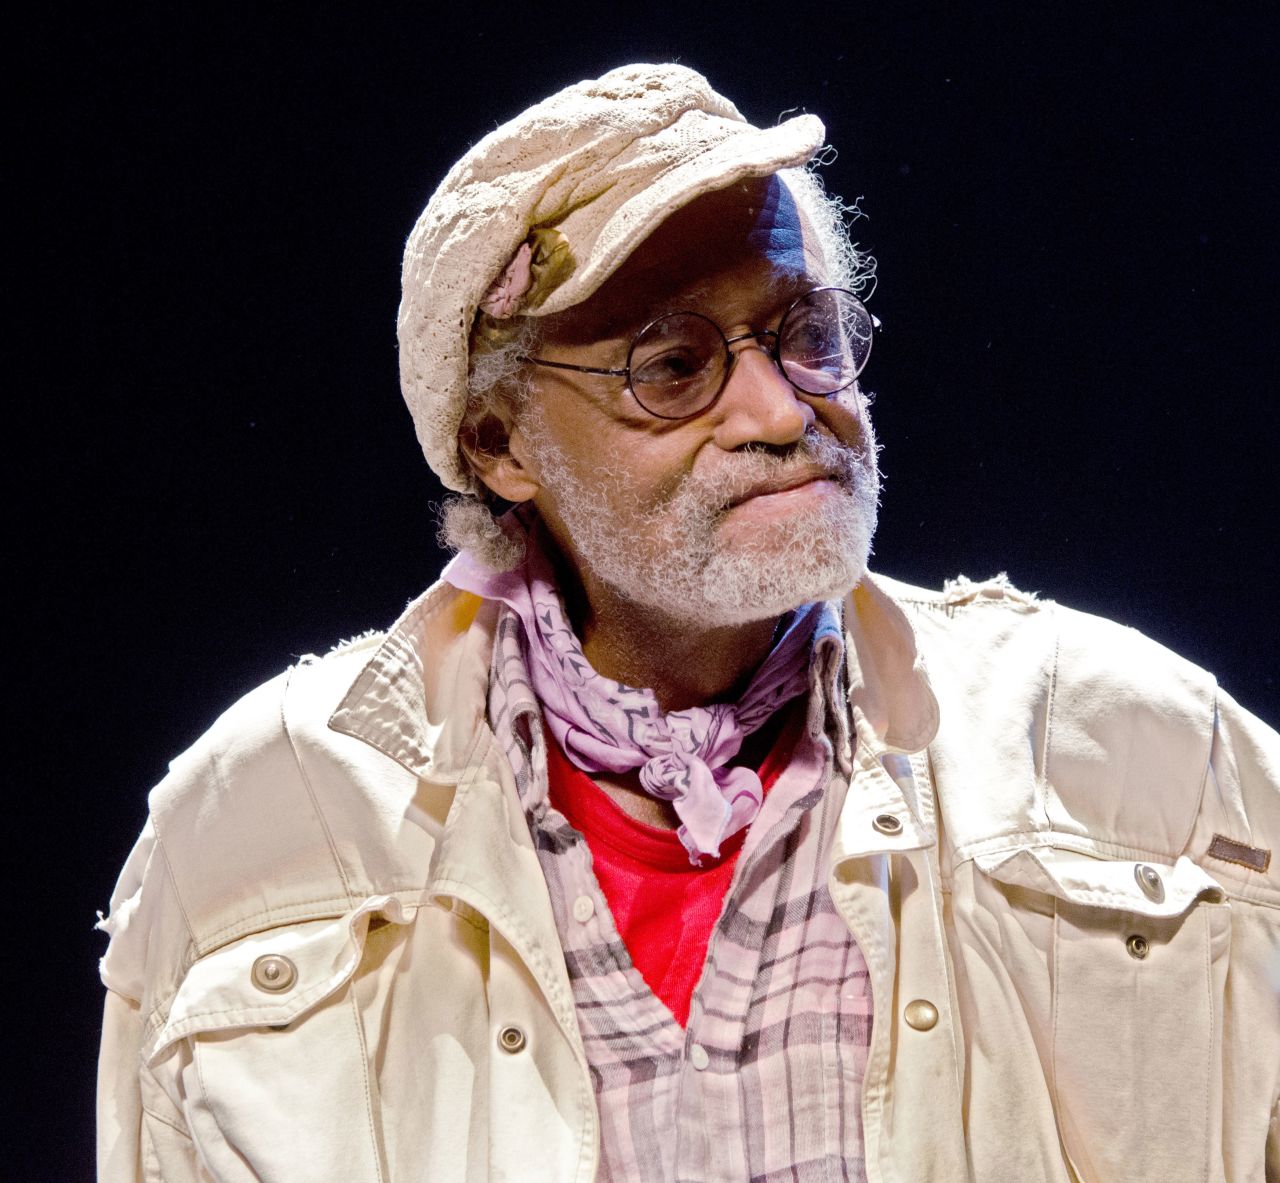 <a href="https://www.cnn.com/2021/09/22/entertainment/melvin-van-peebles-obit/index.html" target="_blank">Melvin Van Peebles,</a> a groundbreaking African American director who helped champion a new wave of modern Black cinema in the 1970s, died on September 21, his son Mario Van Peebles announced. He was 89. Van Peebles' numerous film credits include "Watermelon Man" and "Sweet Sweetback's Baadasssss Song."